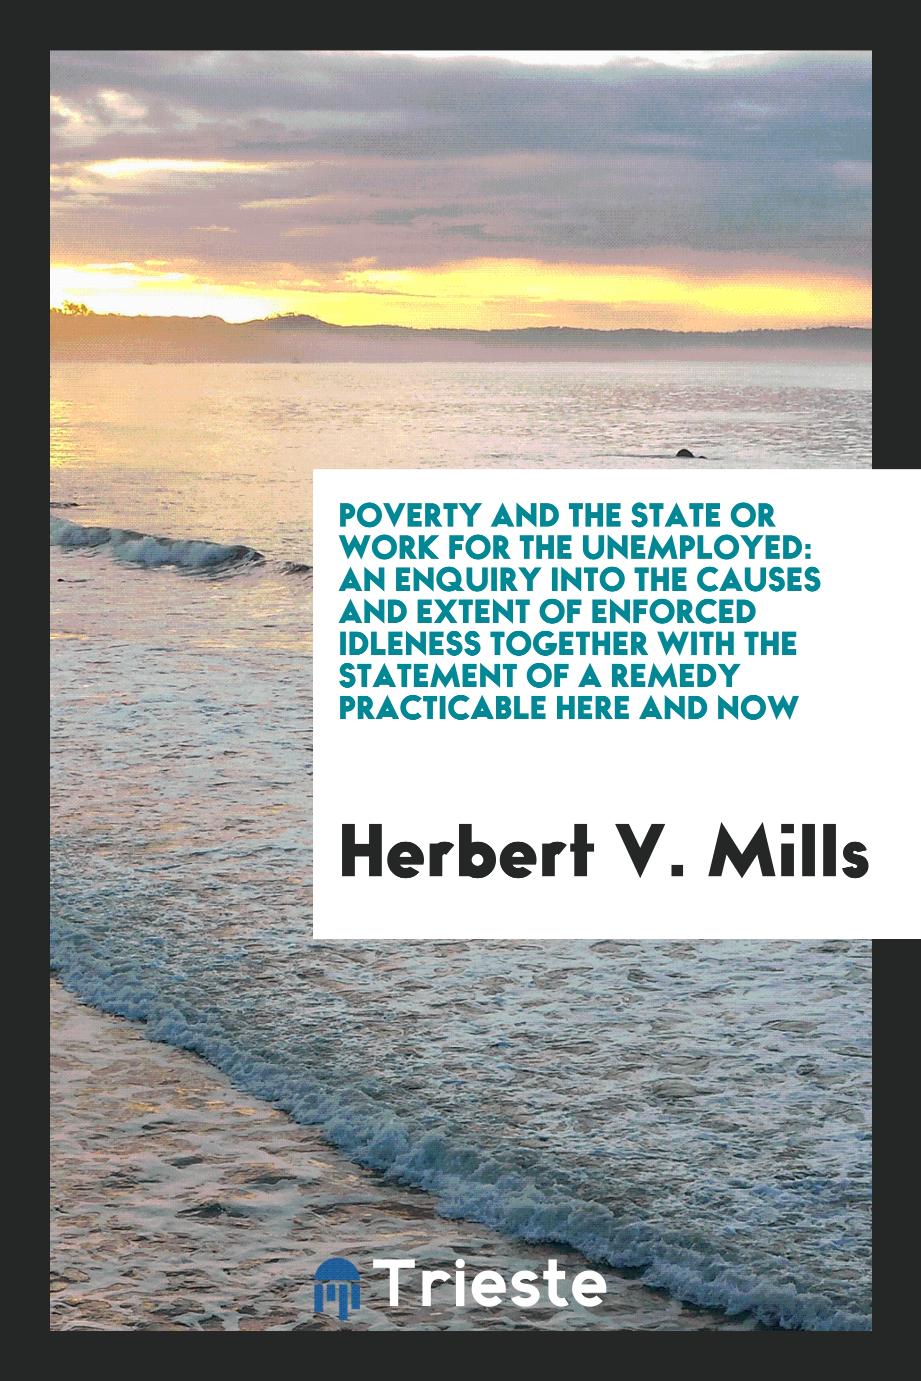 Poverty and the state or work for the unemployed: an enquiry into the causes and extent of enforced idleness together with the statement of a remedy practicable here and now